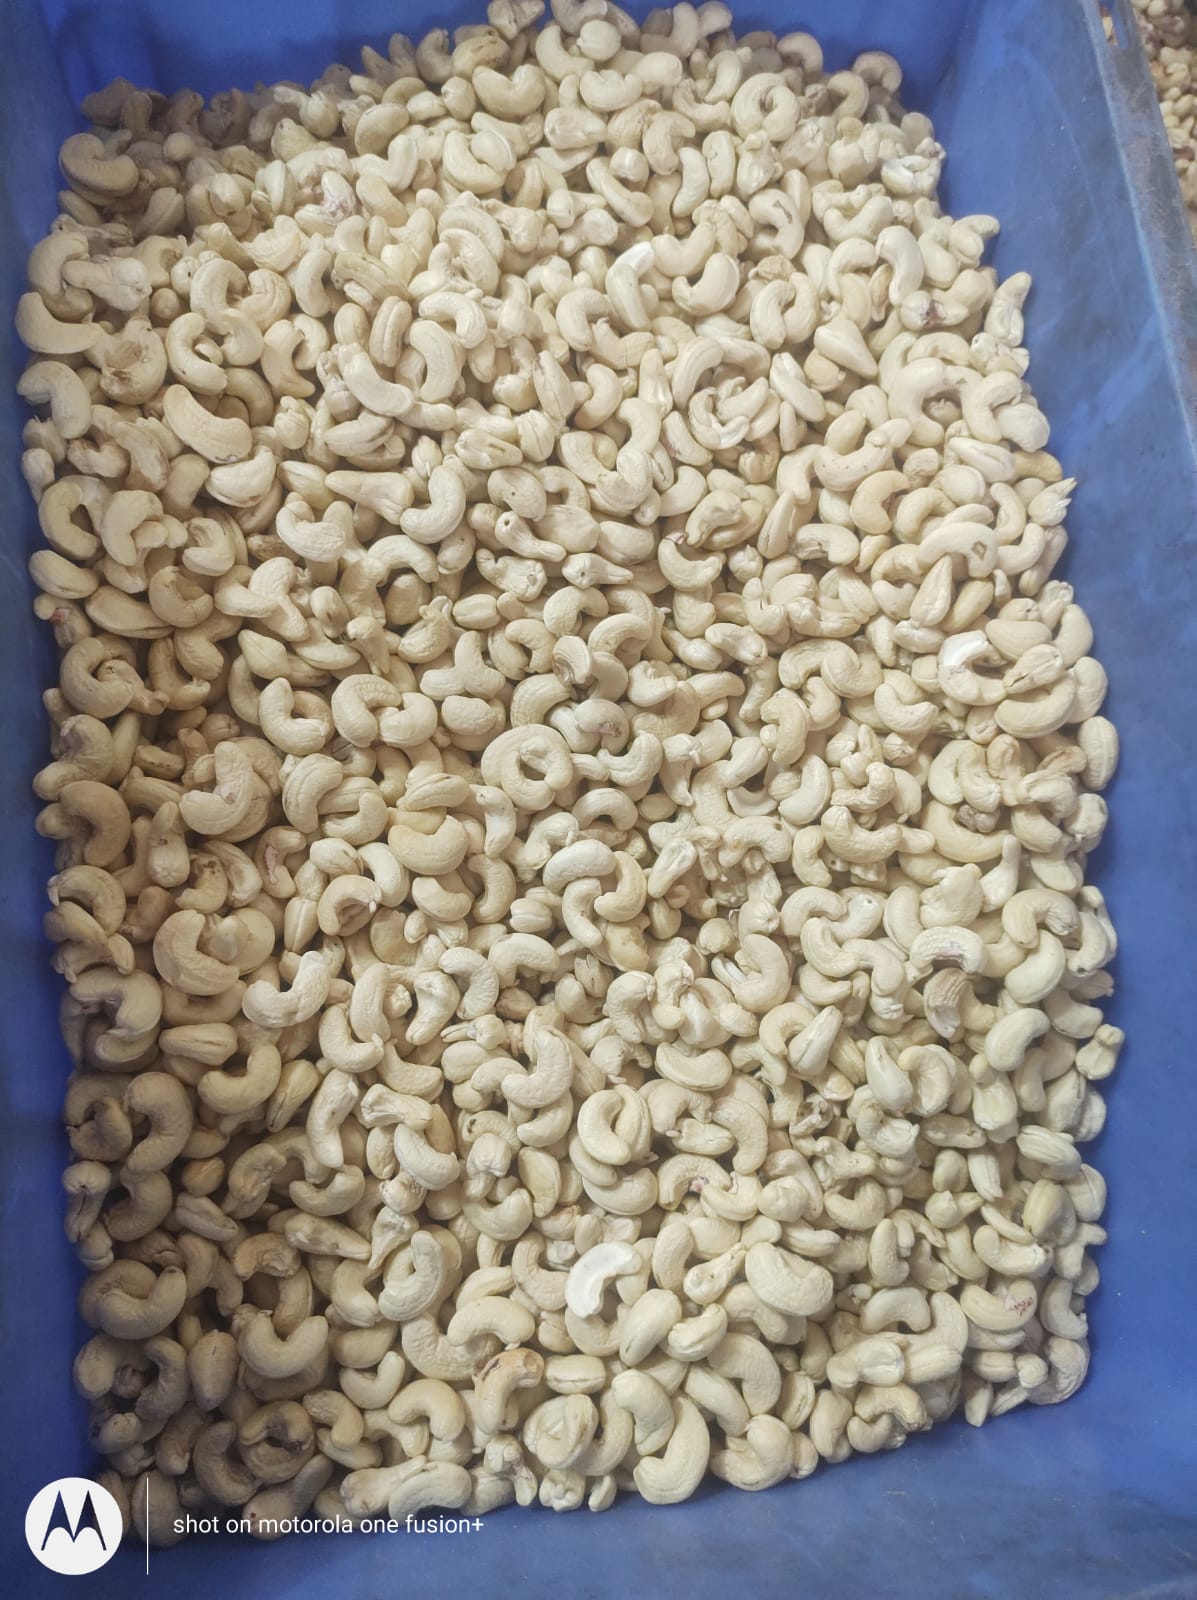 Top Quality Cashew Nuts  from Gunatraders